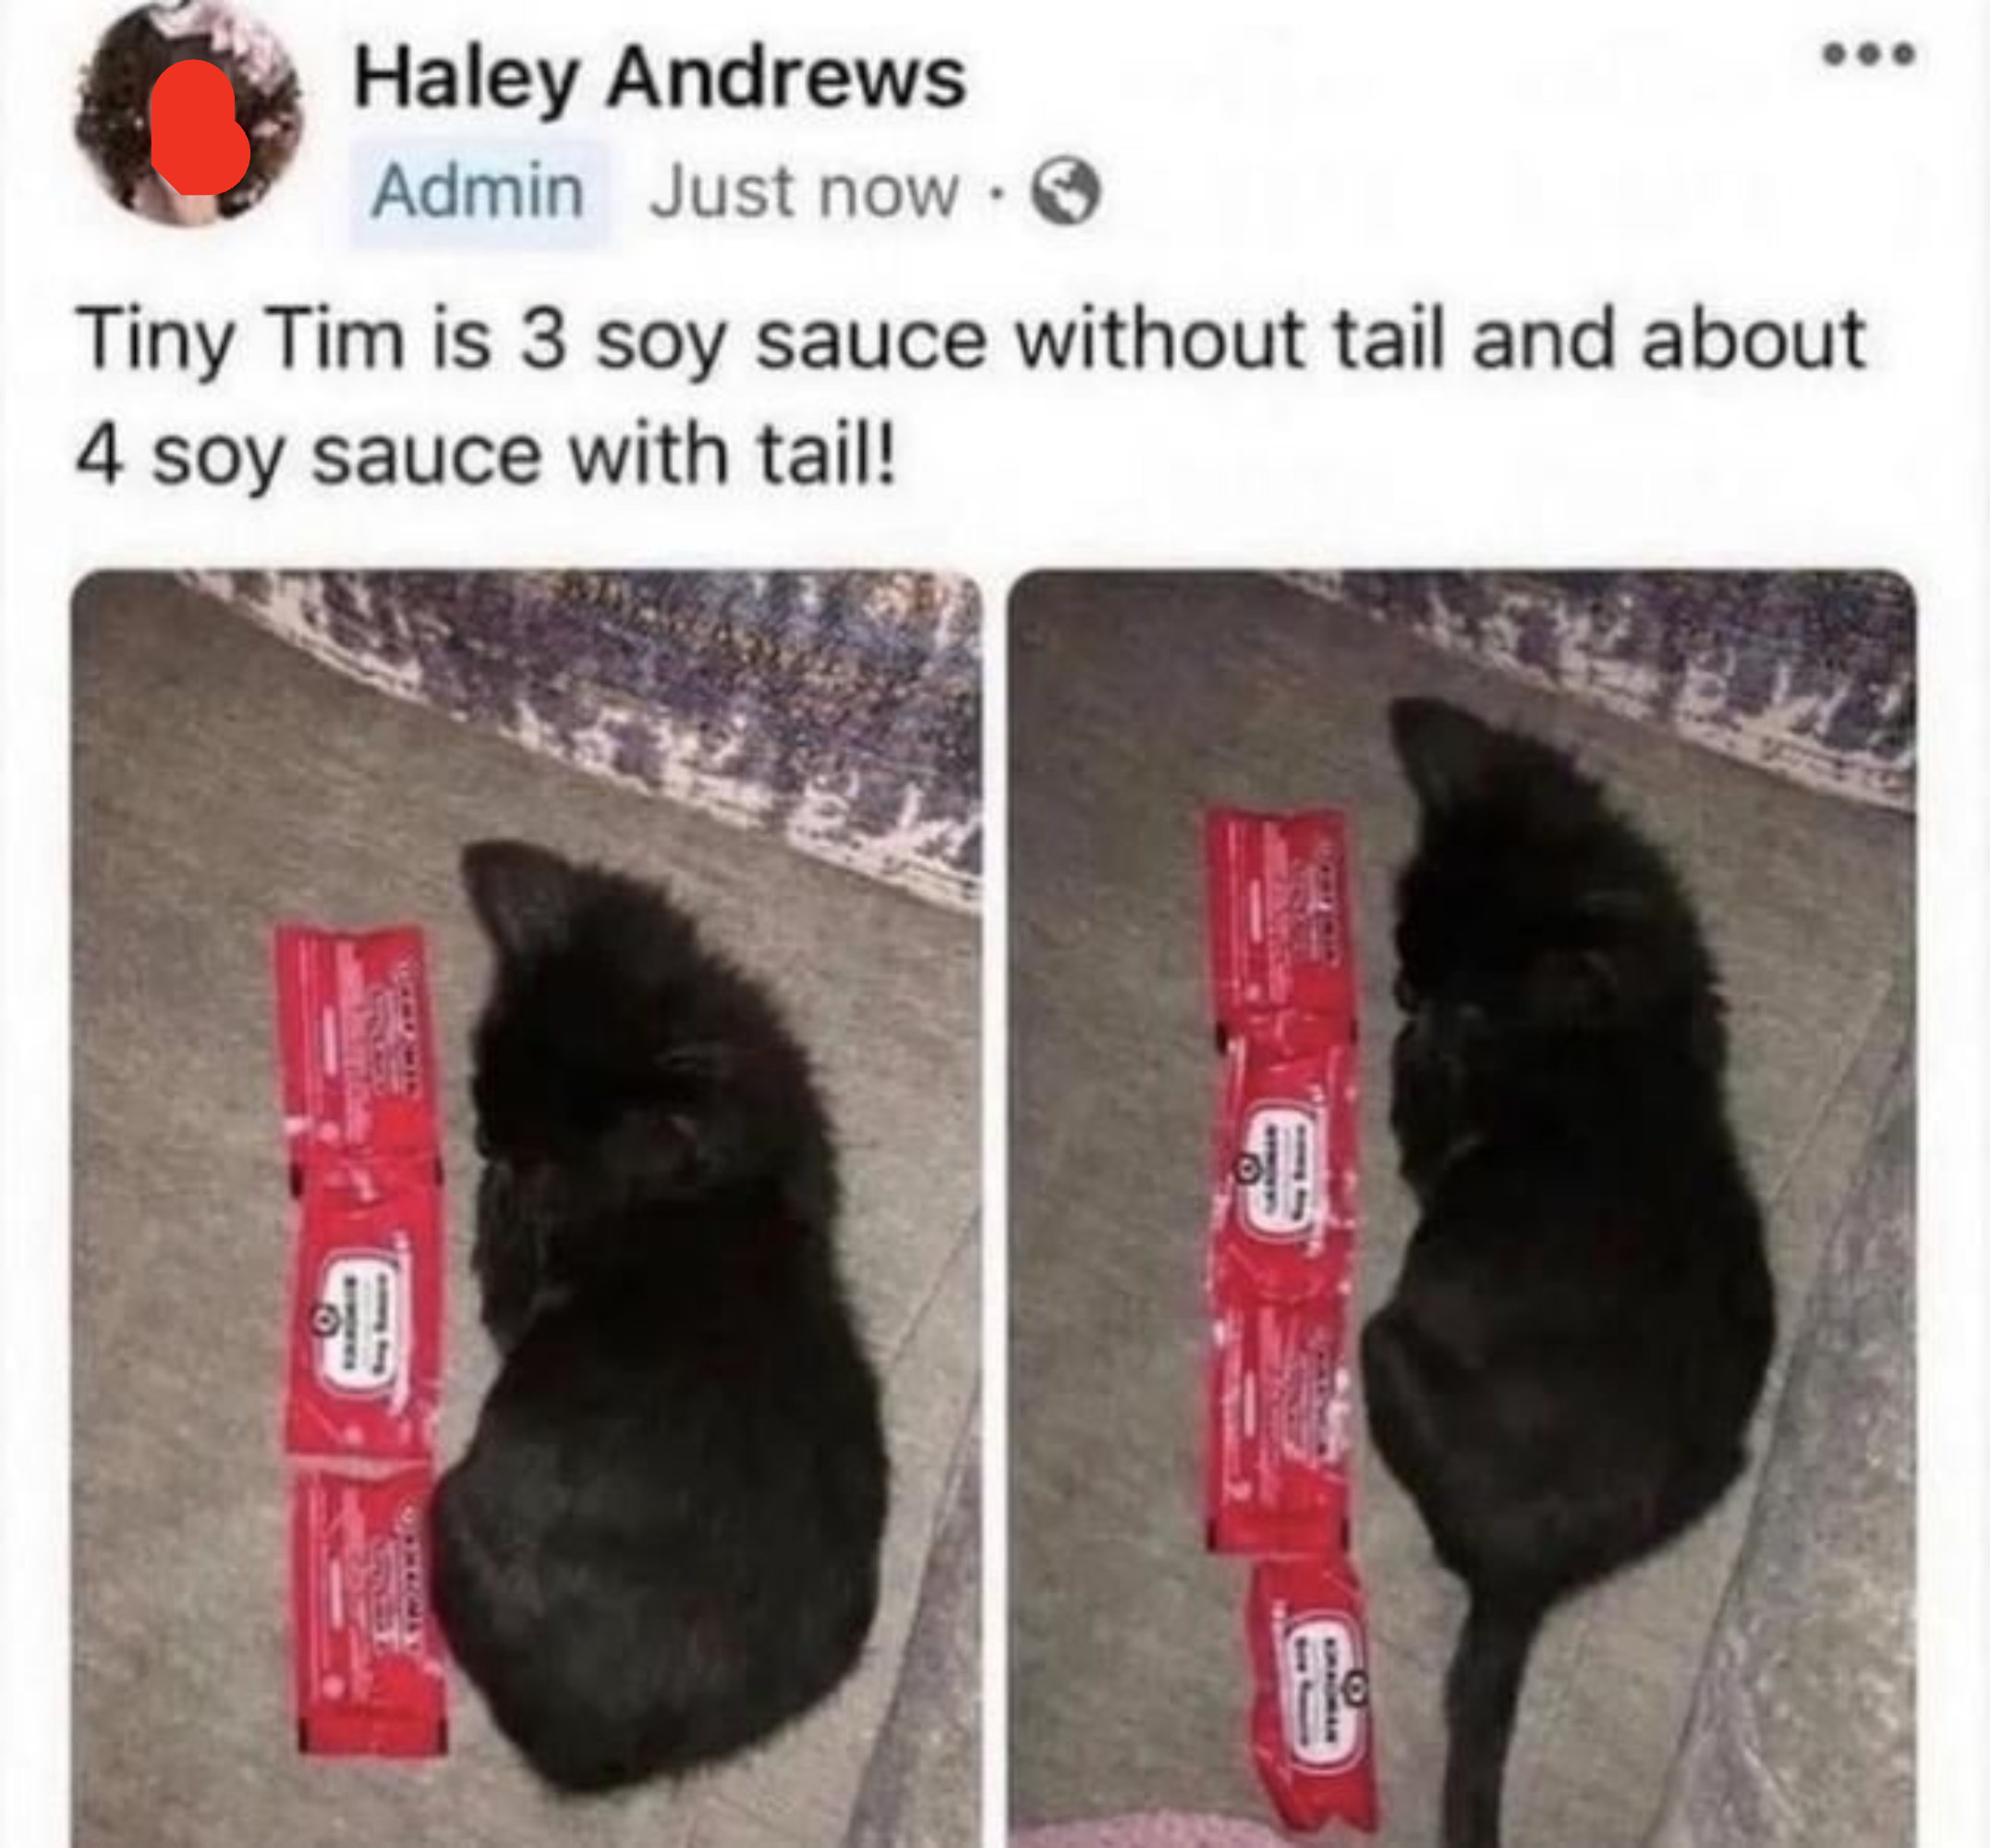 Cat named Tiny Tim measured against takeout soy sauce packets